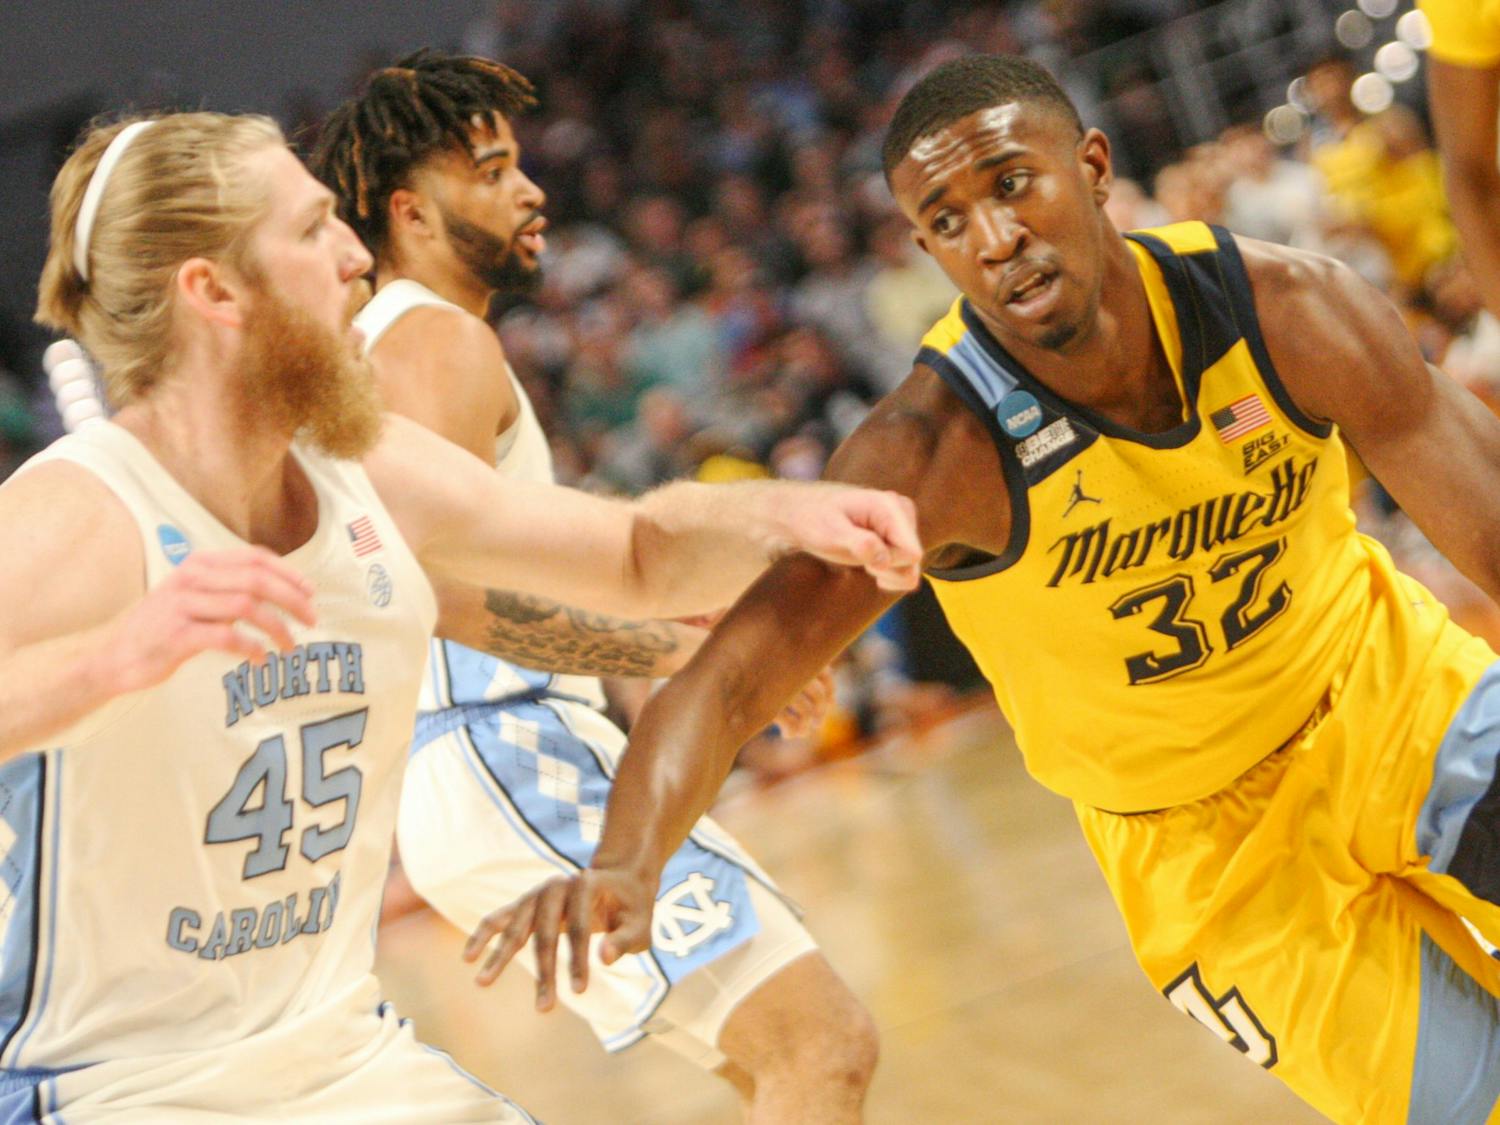 Marquette graduate guard Darryl Morsell (32) drives into the paint during the first round of the NCAA tournament against UNC on Thursday, March 17, 2022, in Fort Worth, Texas. UNC won 95-63.